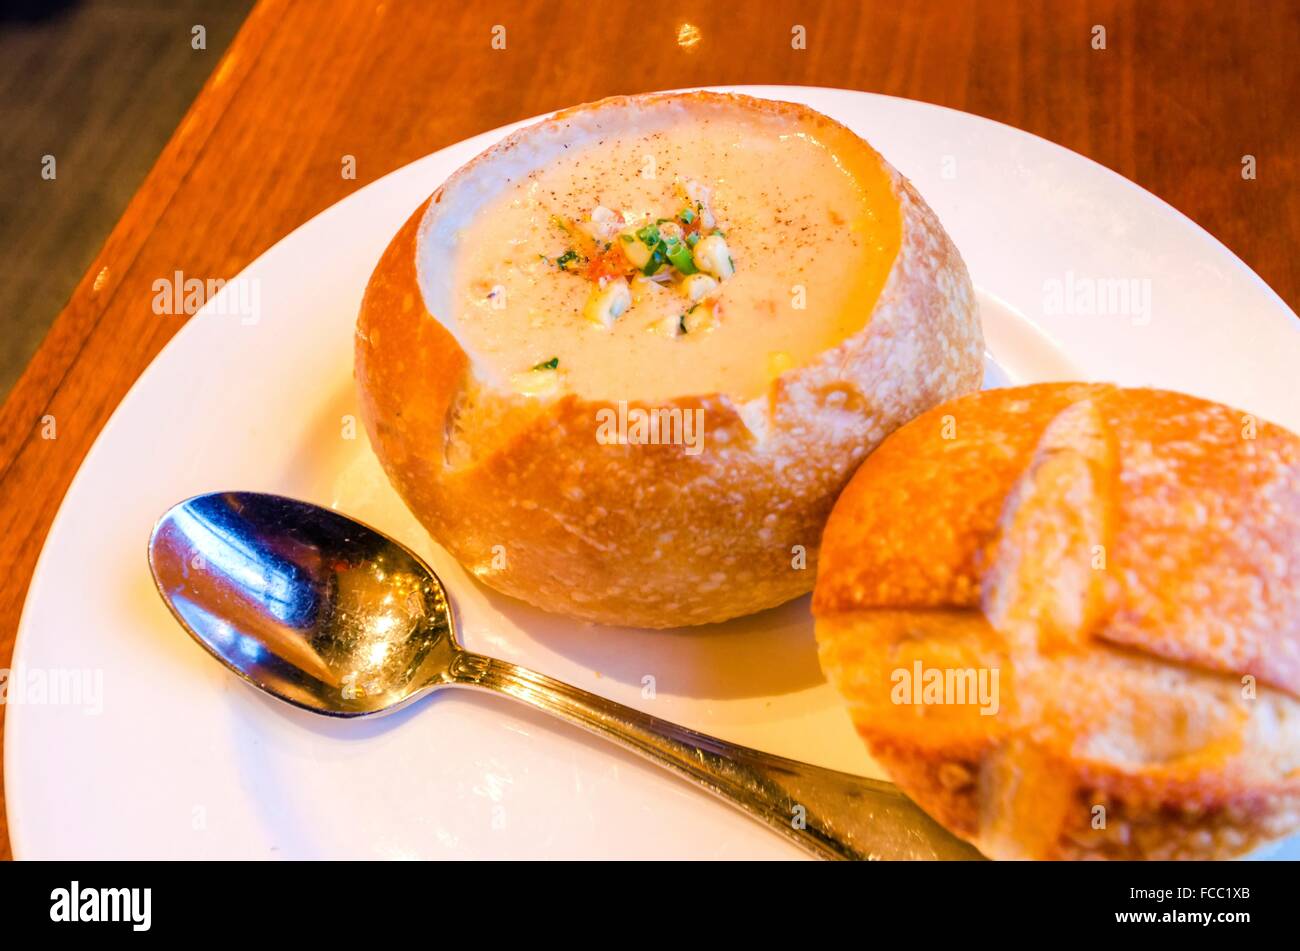 Close up of a Sourdough Clam Chowder gourmet dish. A creamy soup made of clams and vegetables served in a loaf of bread by remov Stock Photo